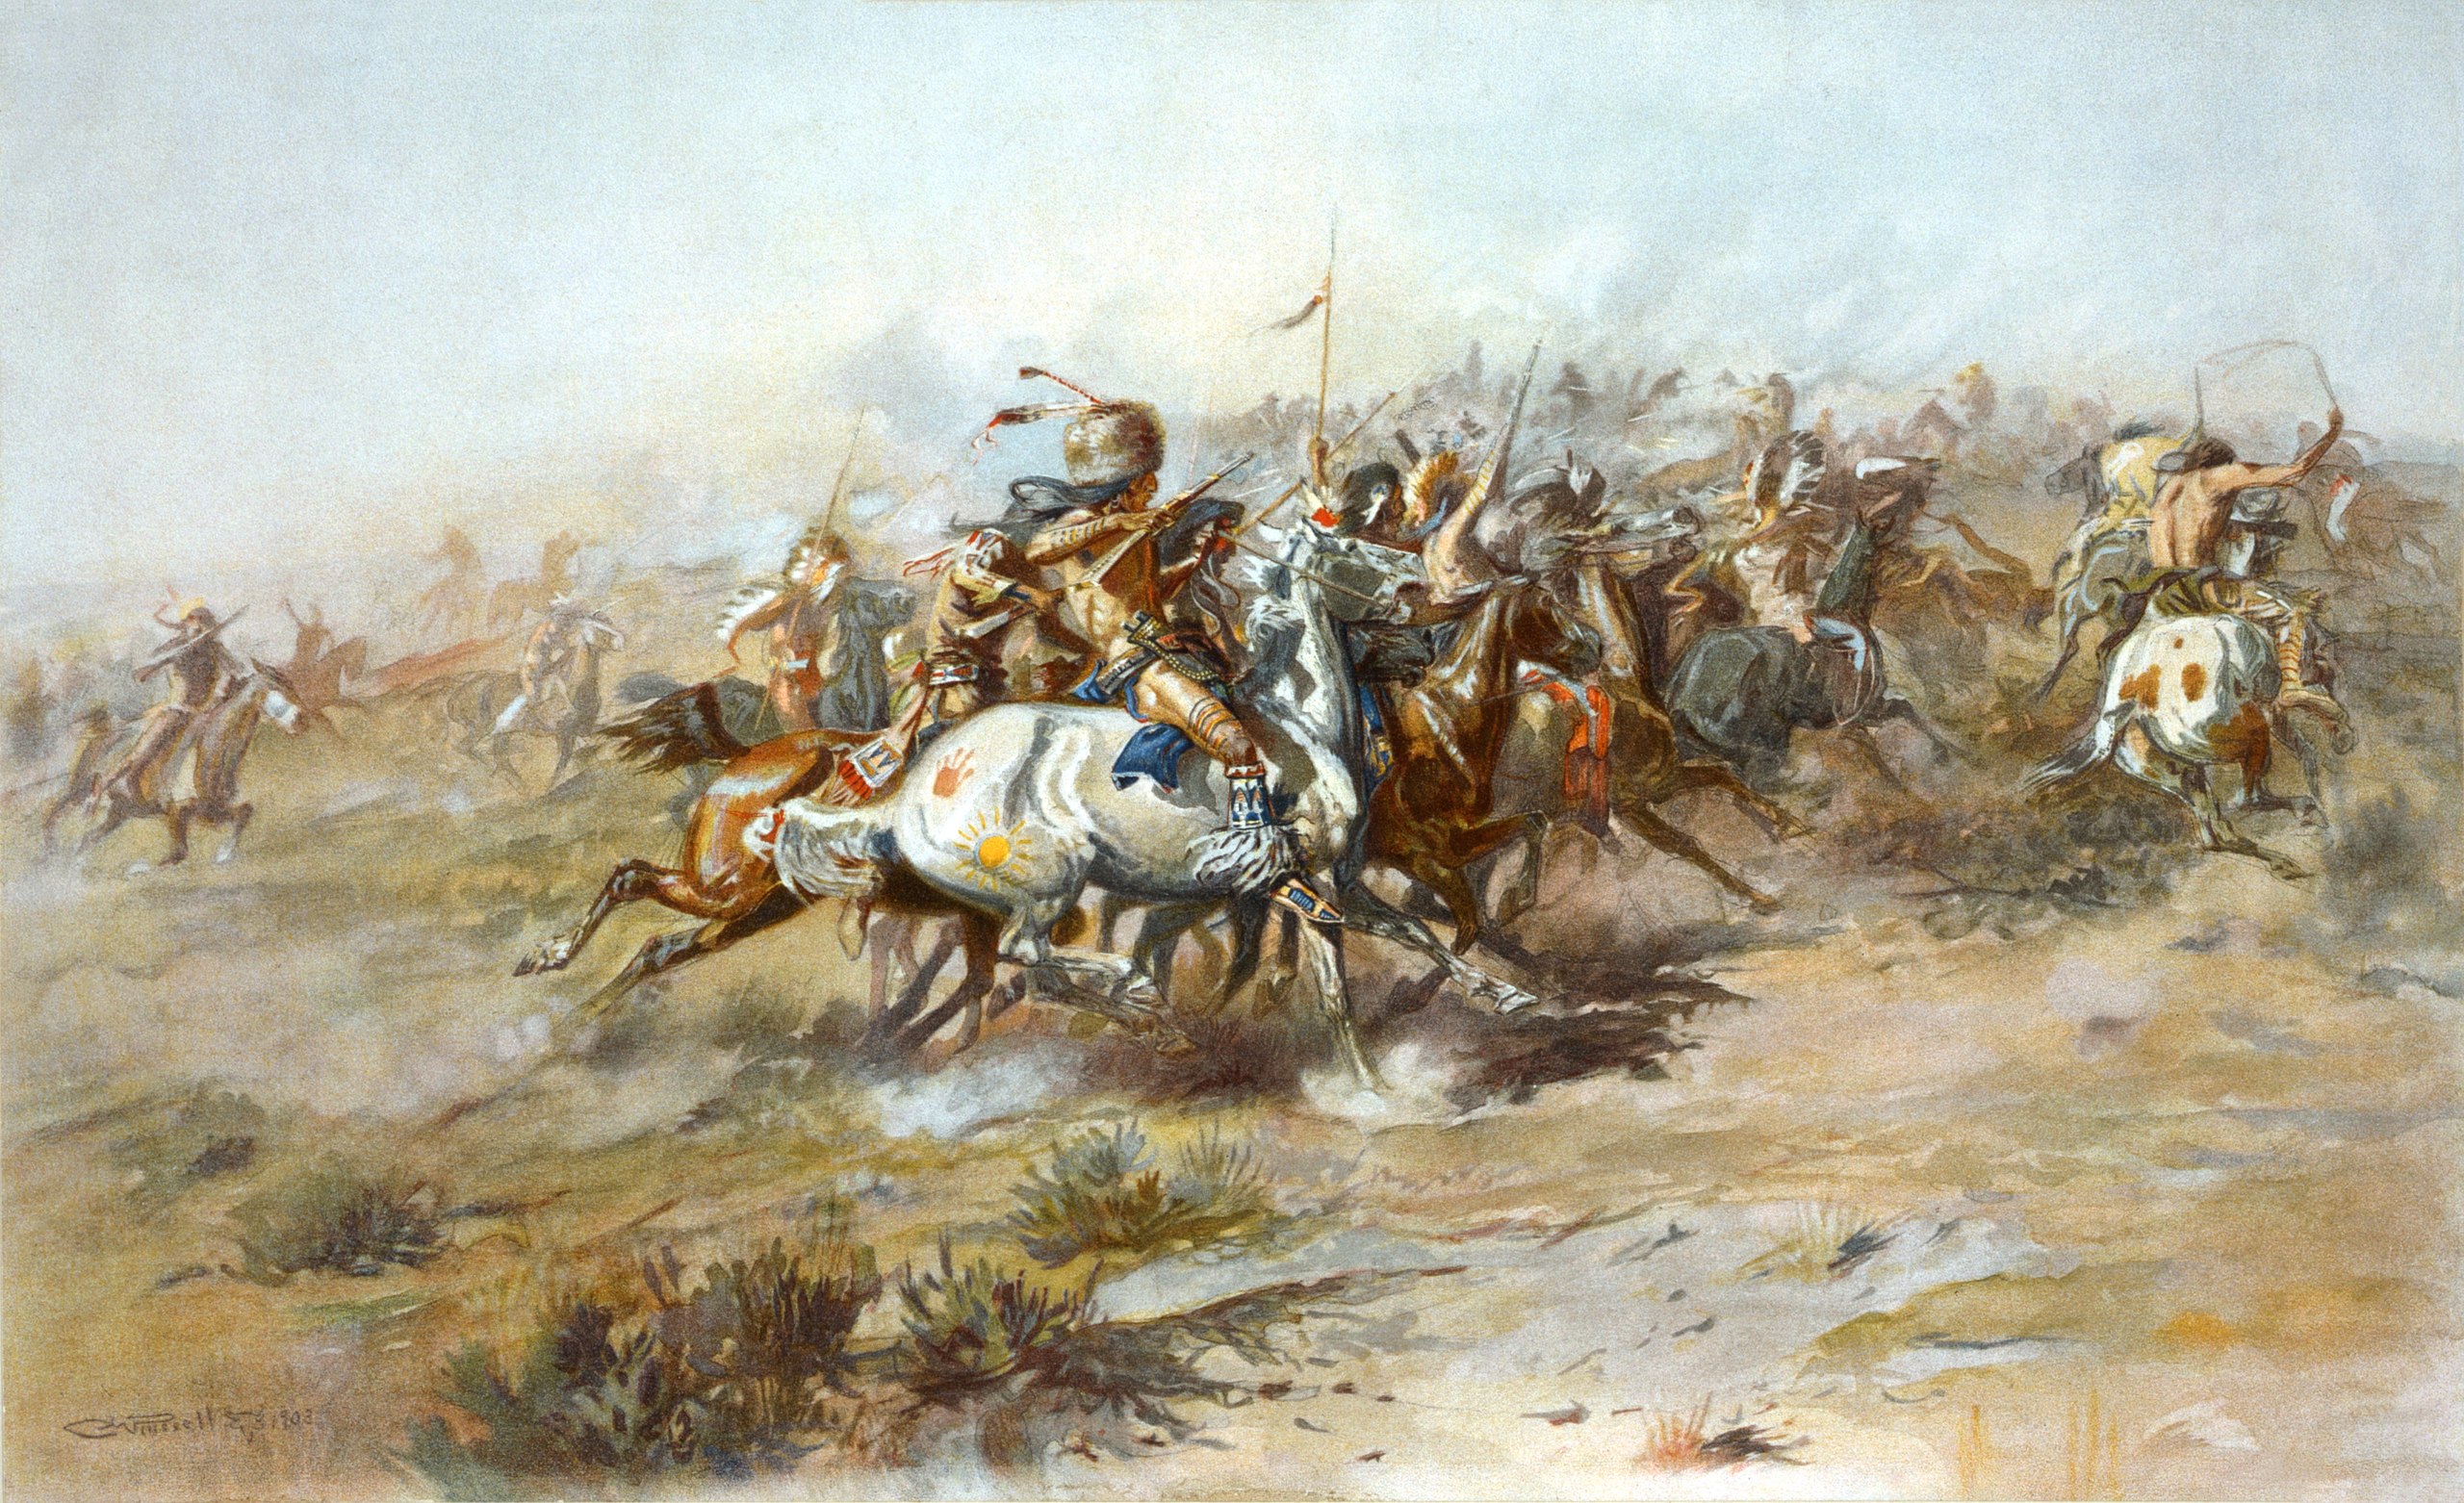 The Custer Fight Painting by Charles Marion Russell